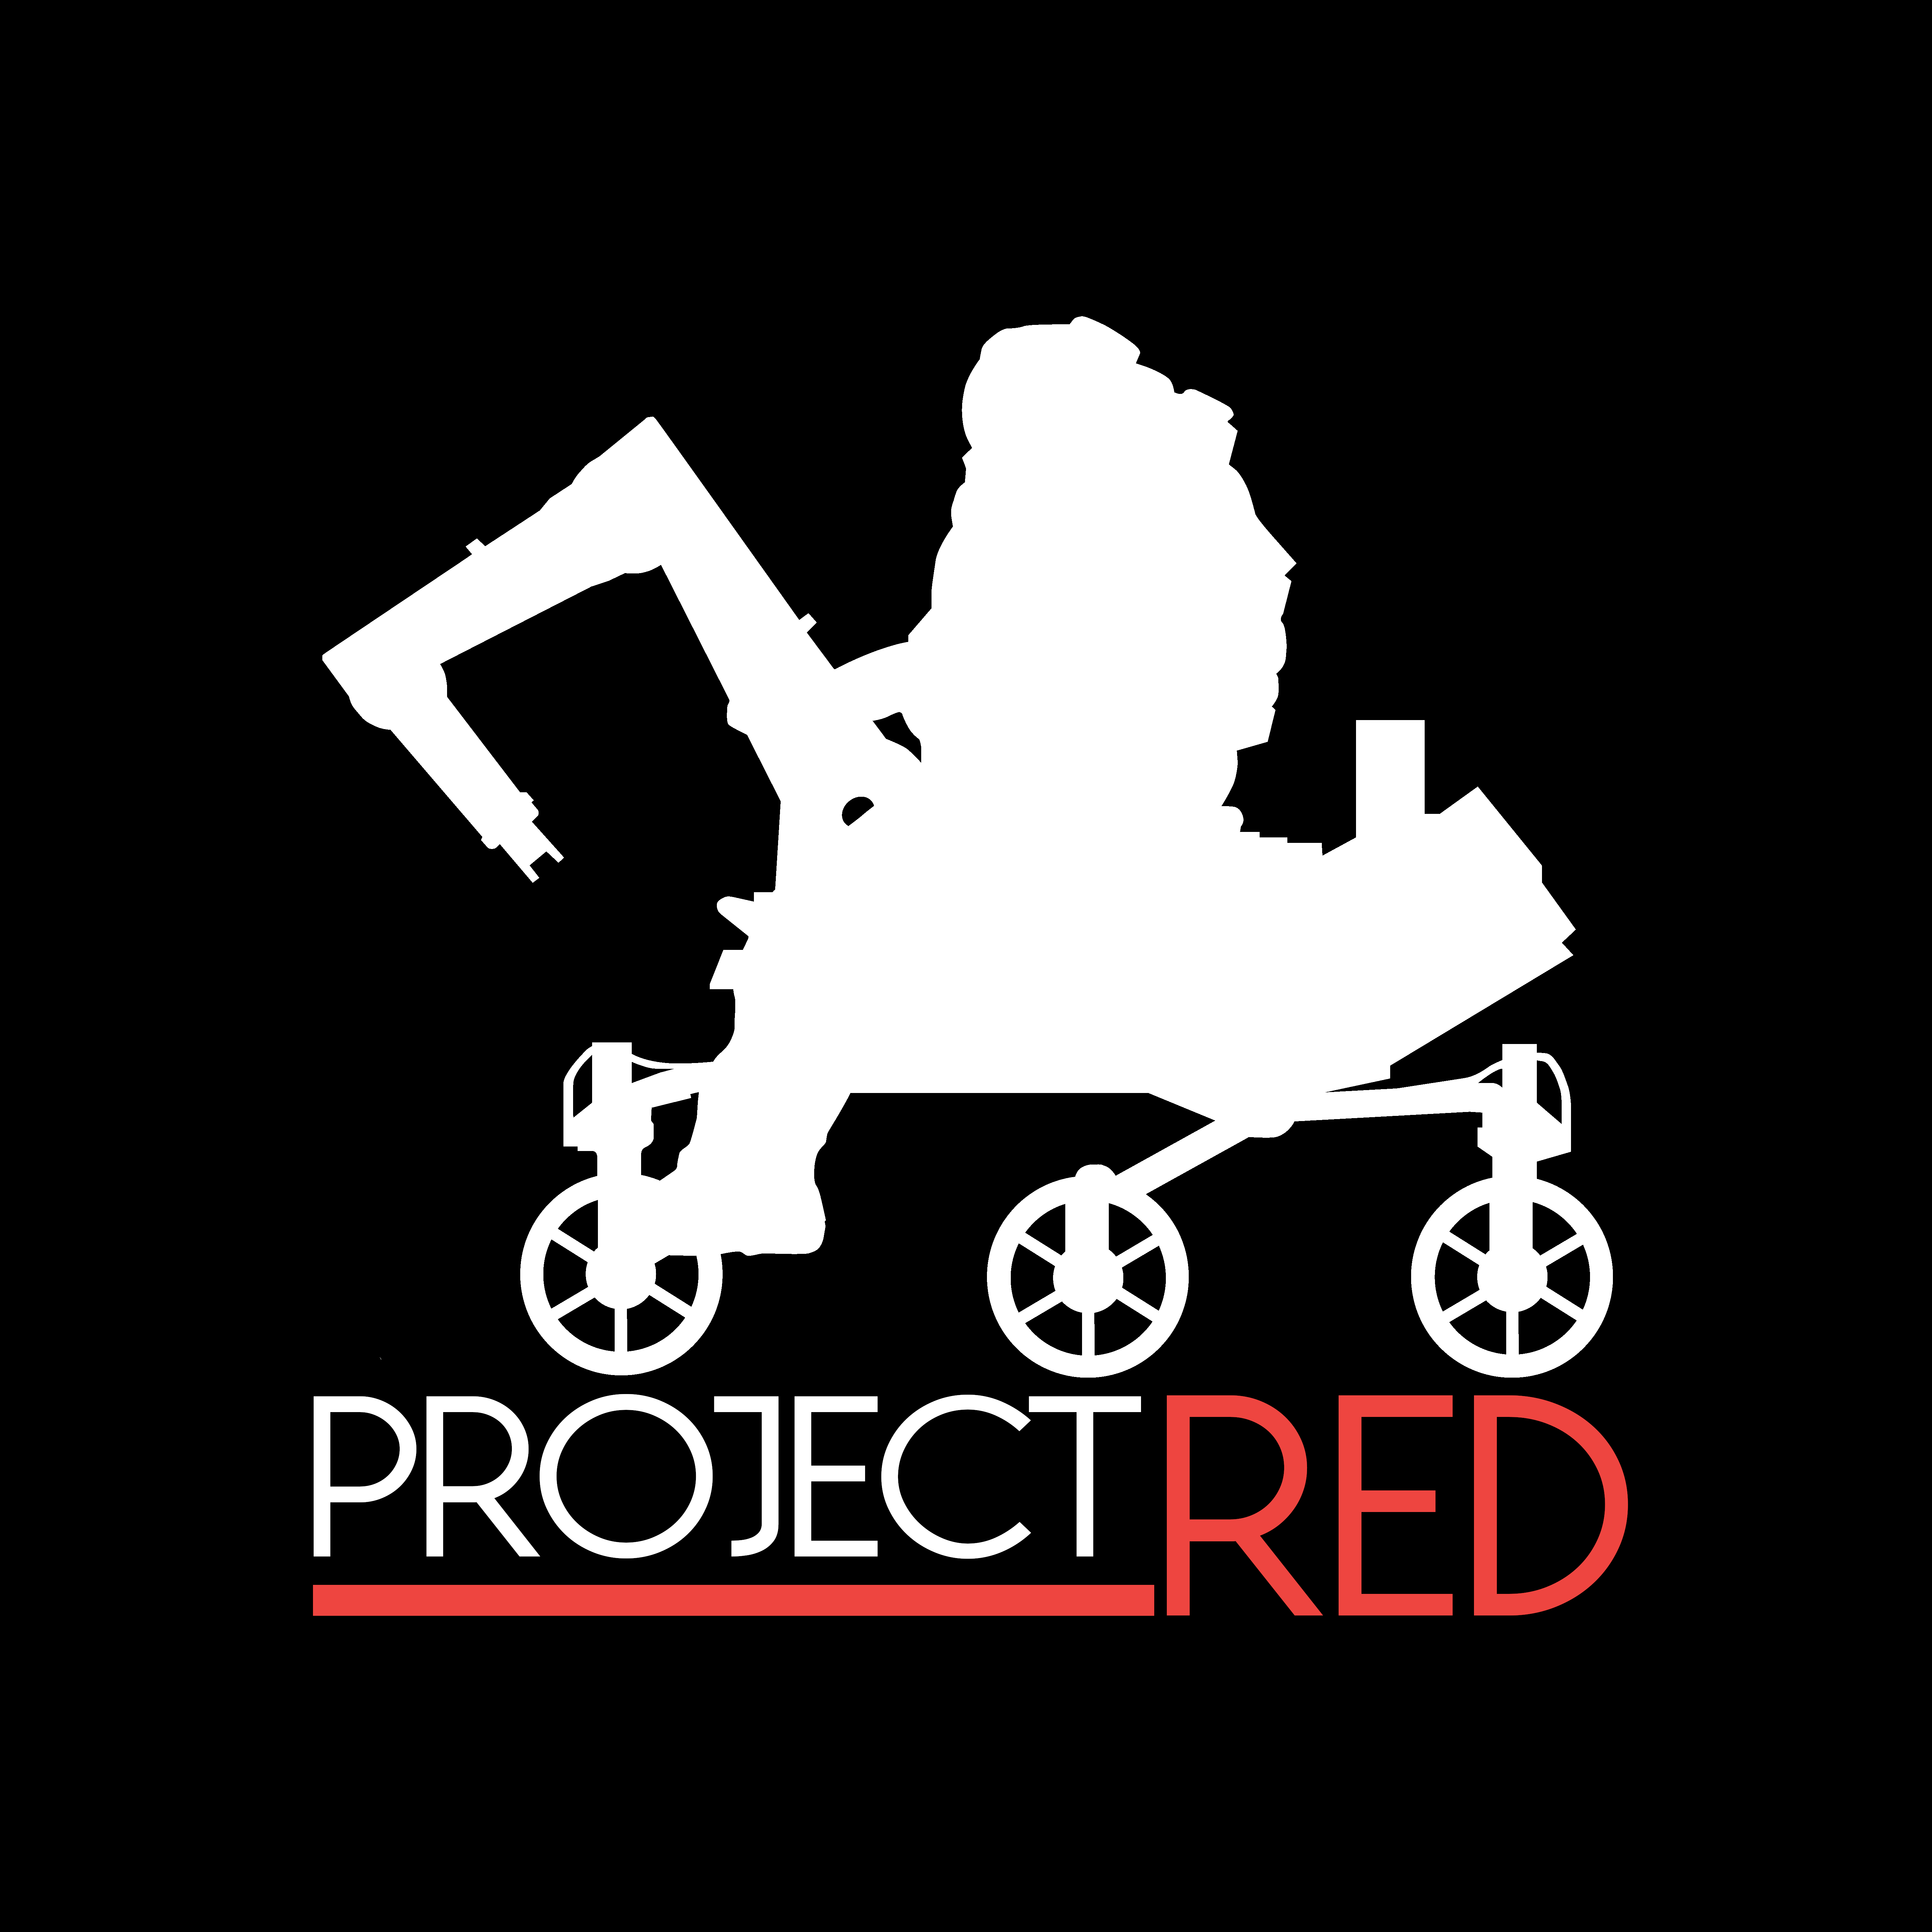 Design of an autonomous rover by Project Red